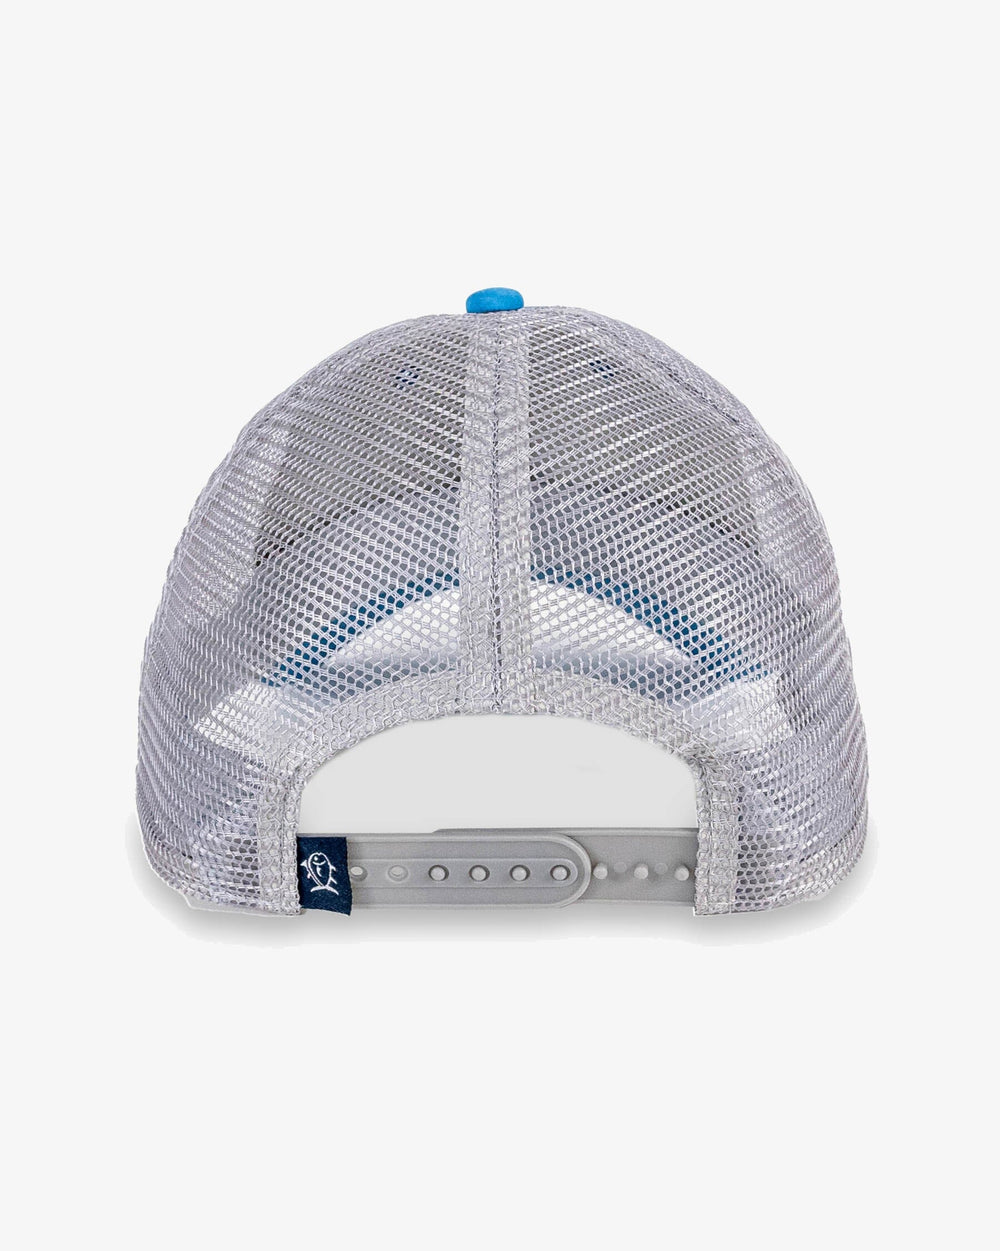 The back view of the Southern Tide Flyday Trucker Hat by Southern Tide - Blue